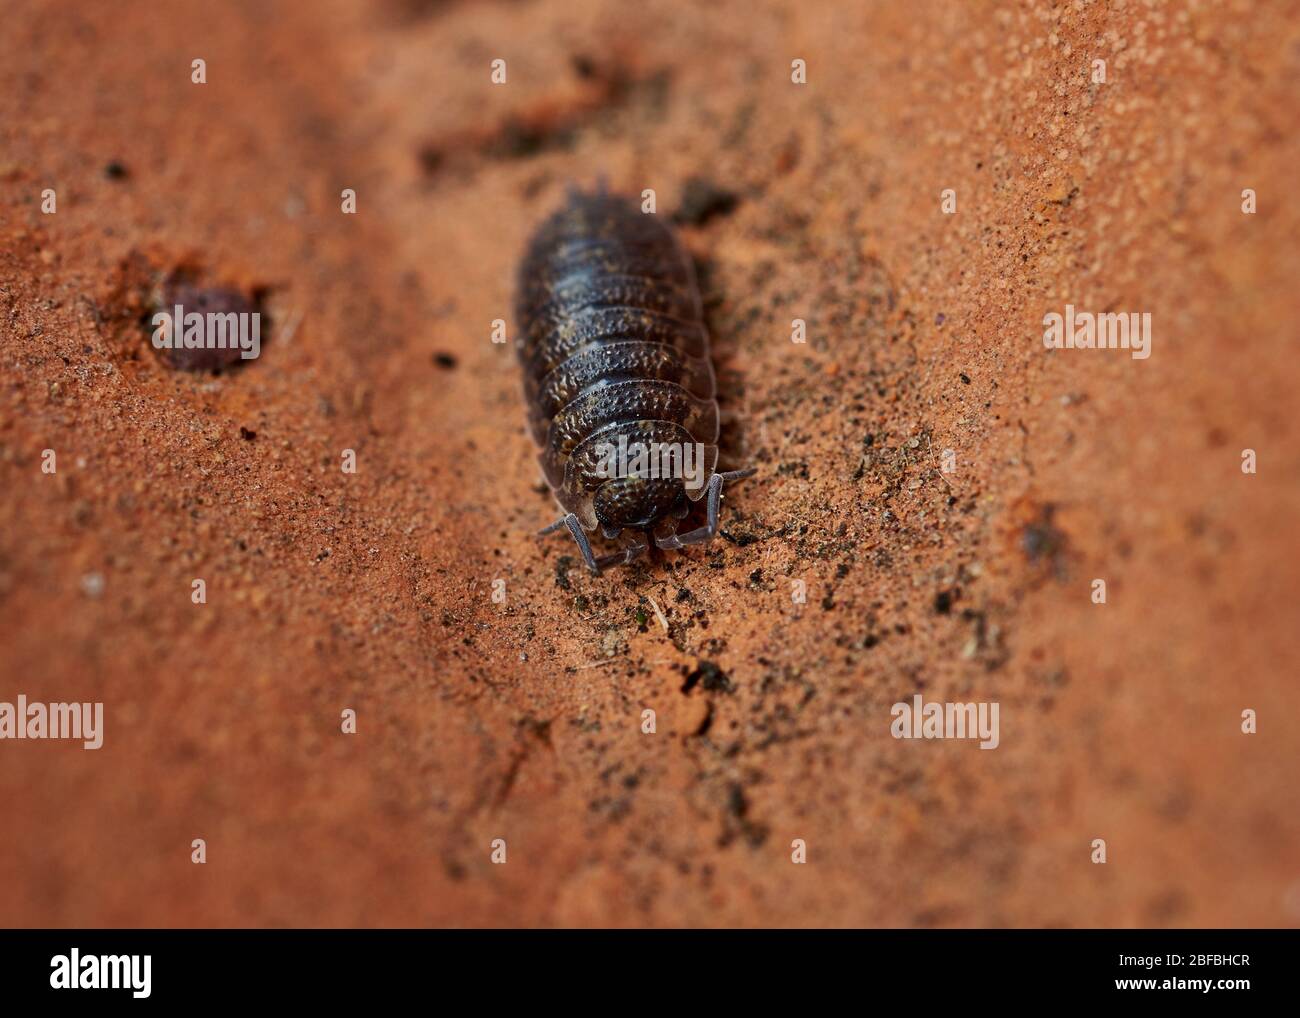 A close-up view of a Woodlouse (Trachelipus rathkii) crawling on a grimy red brick. Stock Photo